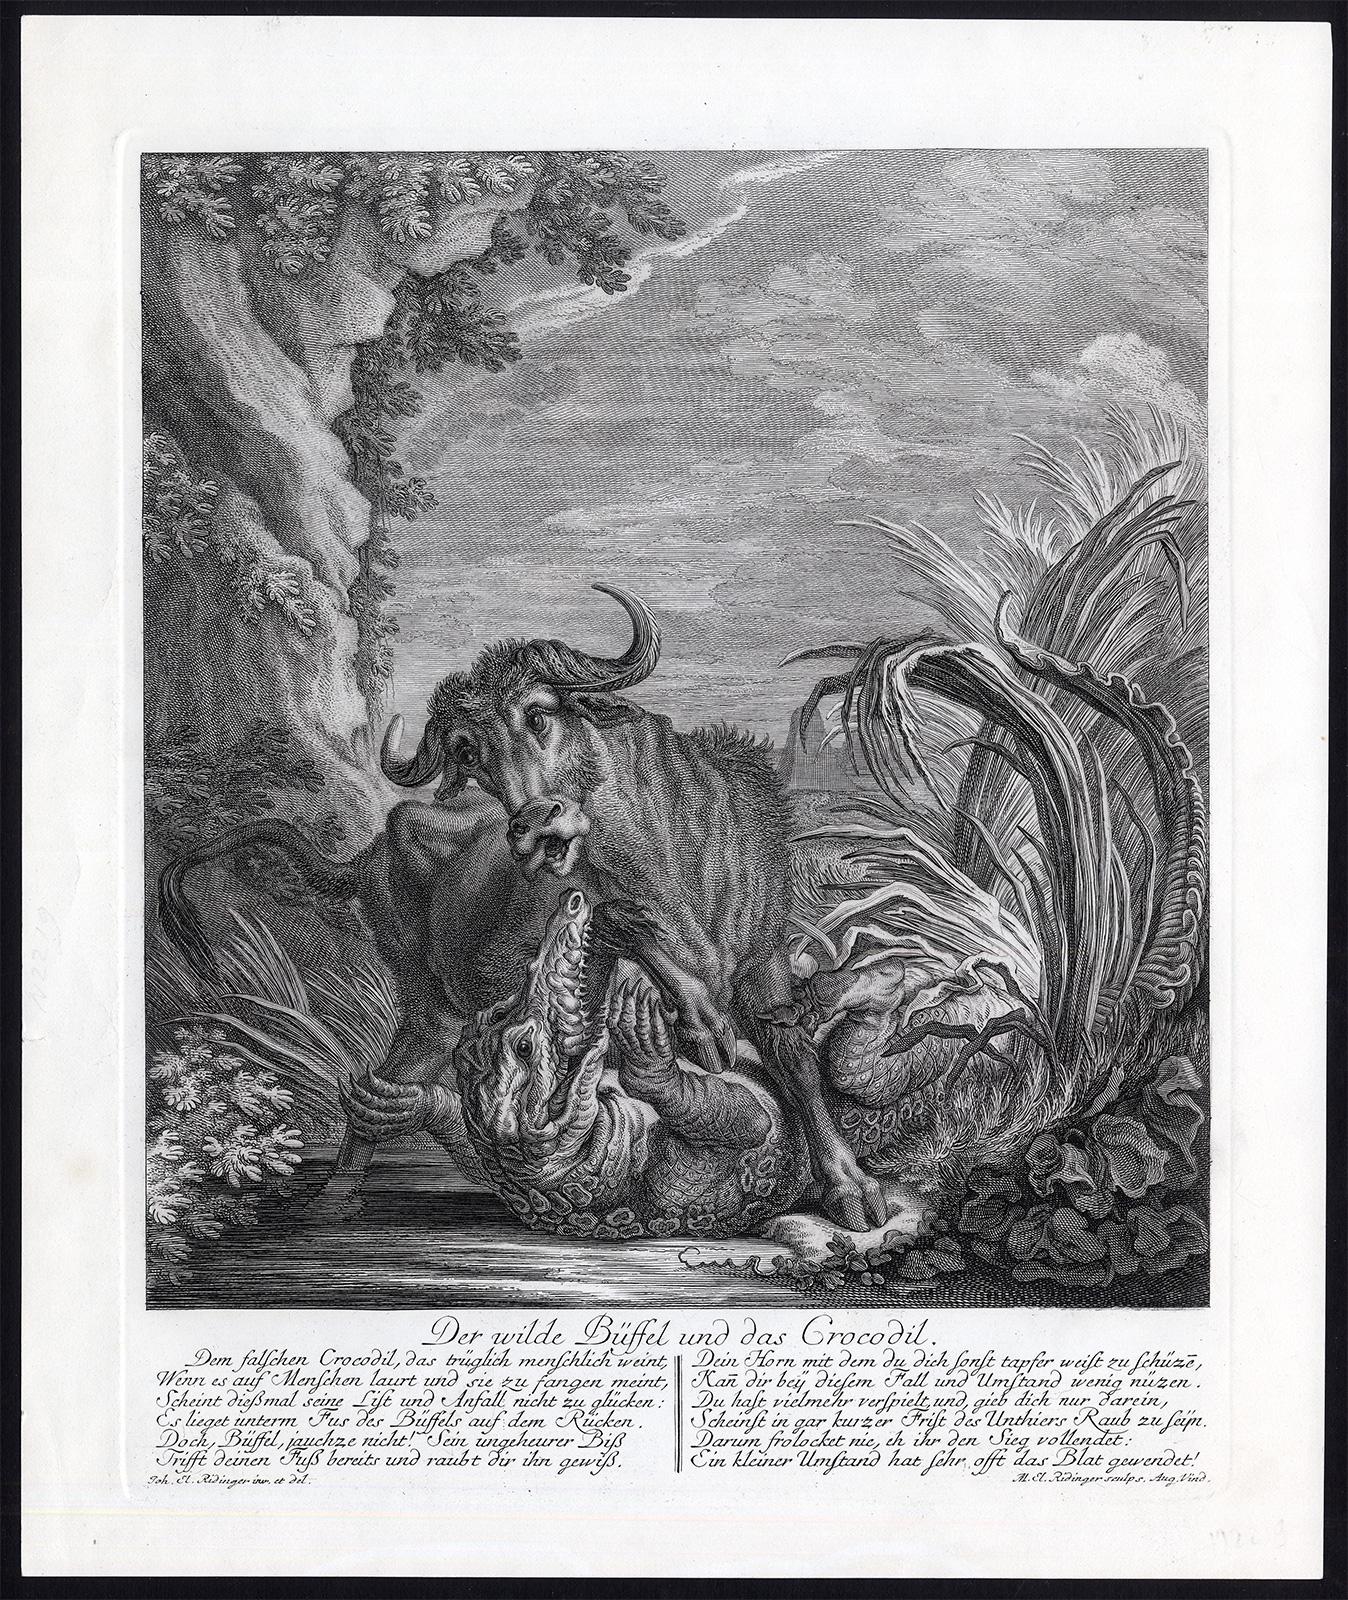 Hunting scene with water buffalo and crocodile by Ridinger - Engraving - 18th c - Print by Martin Elias Ridinger